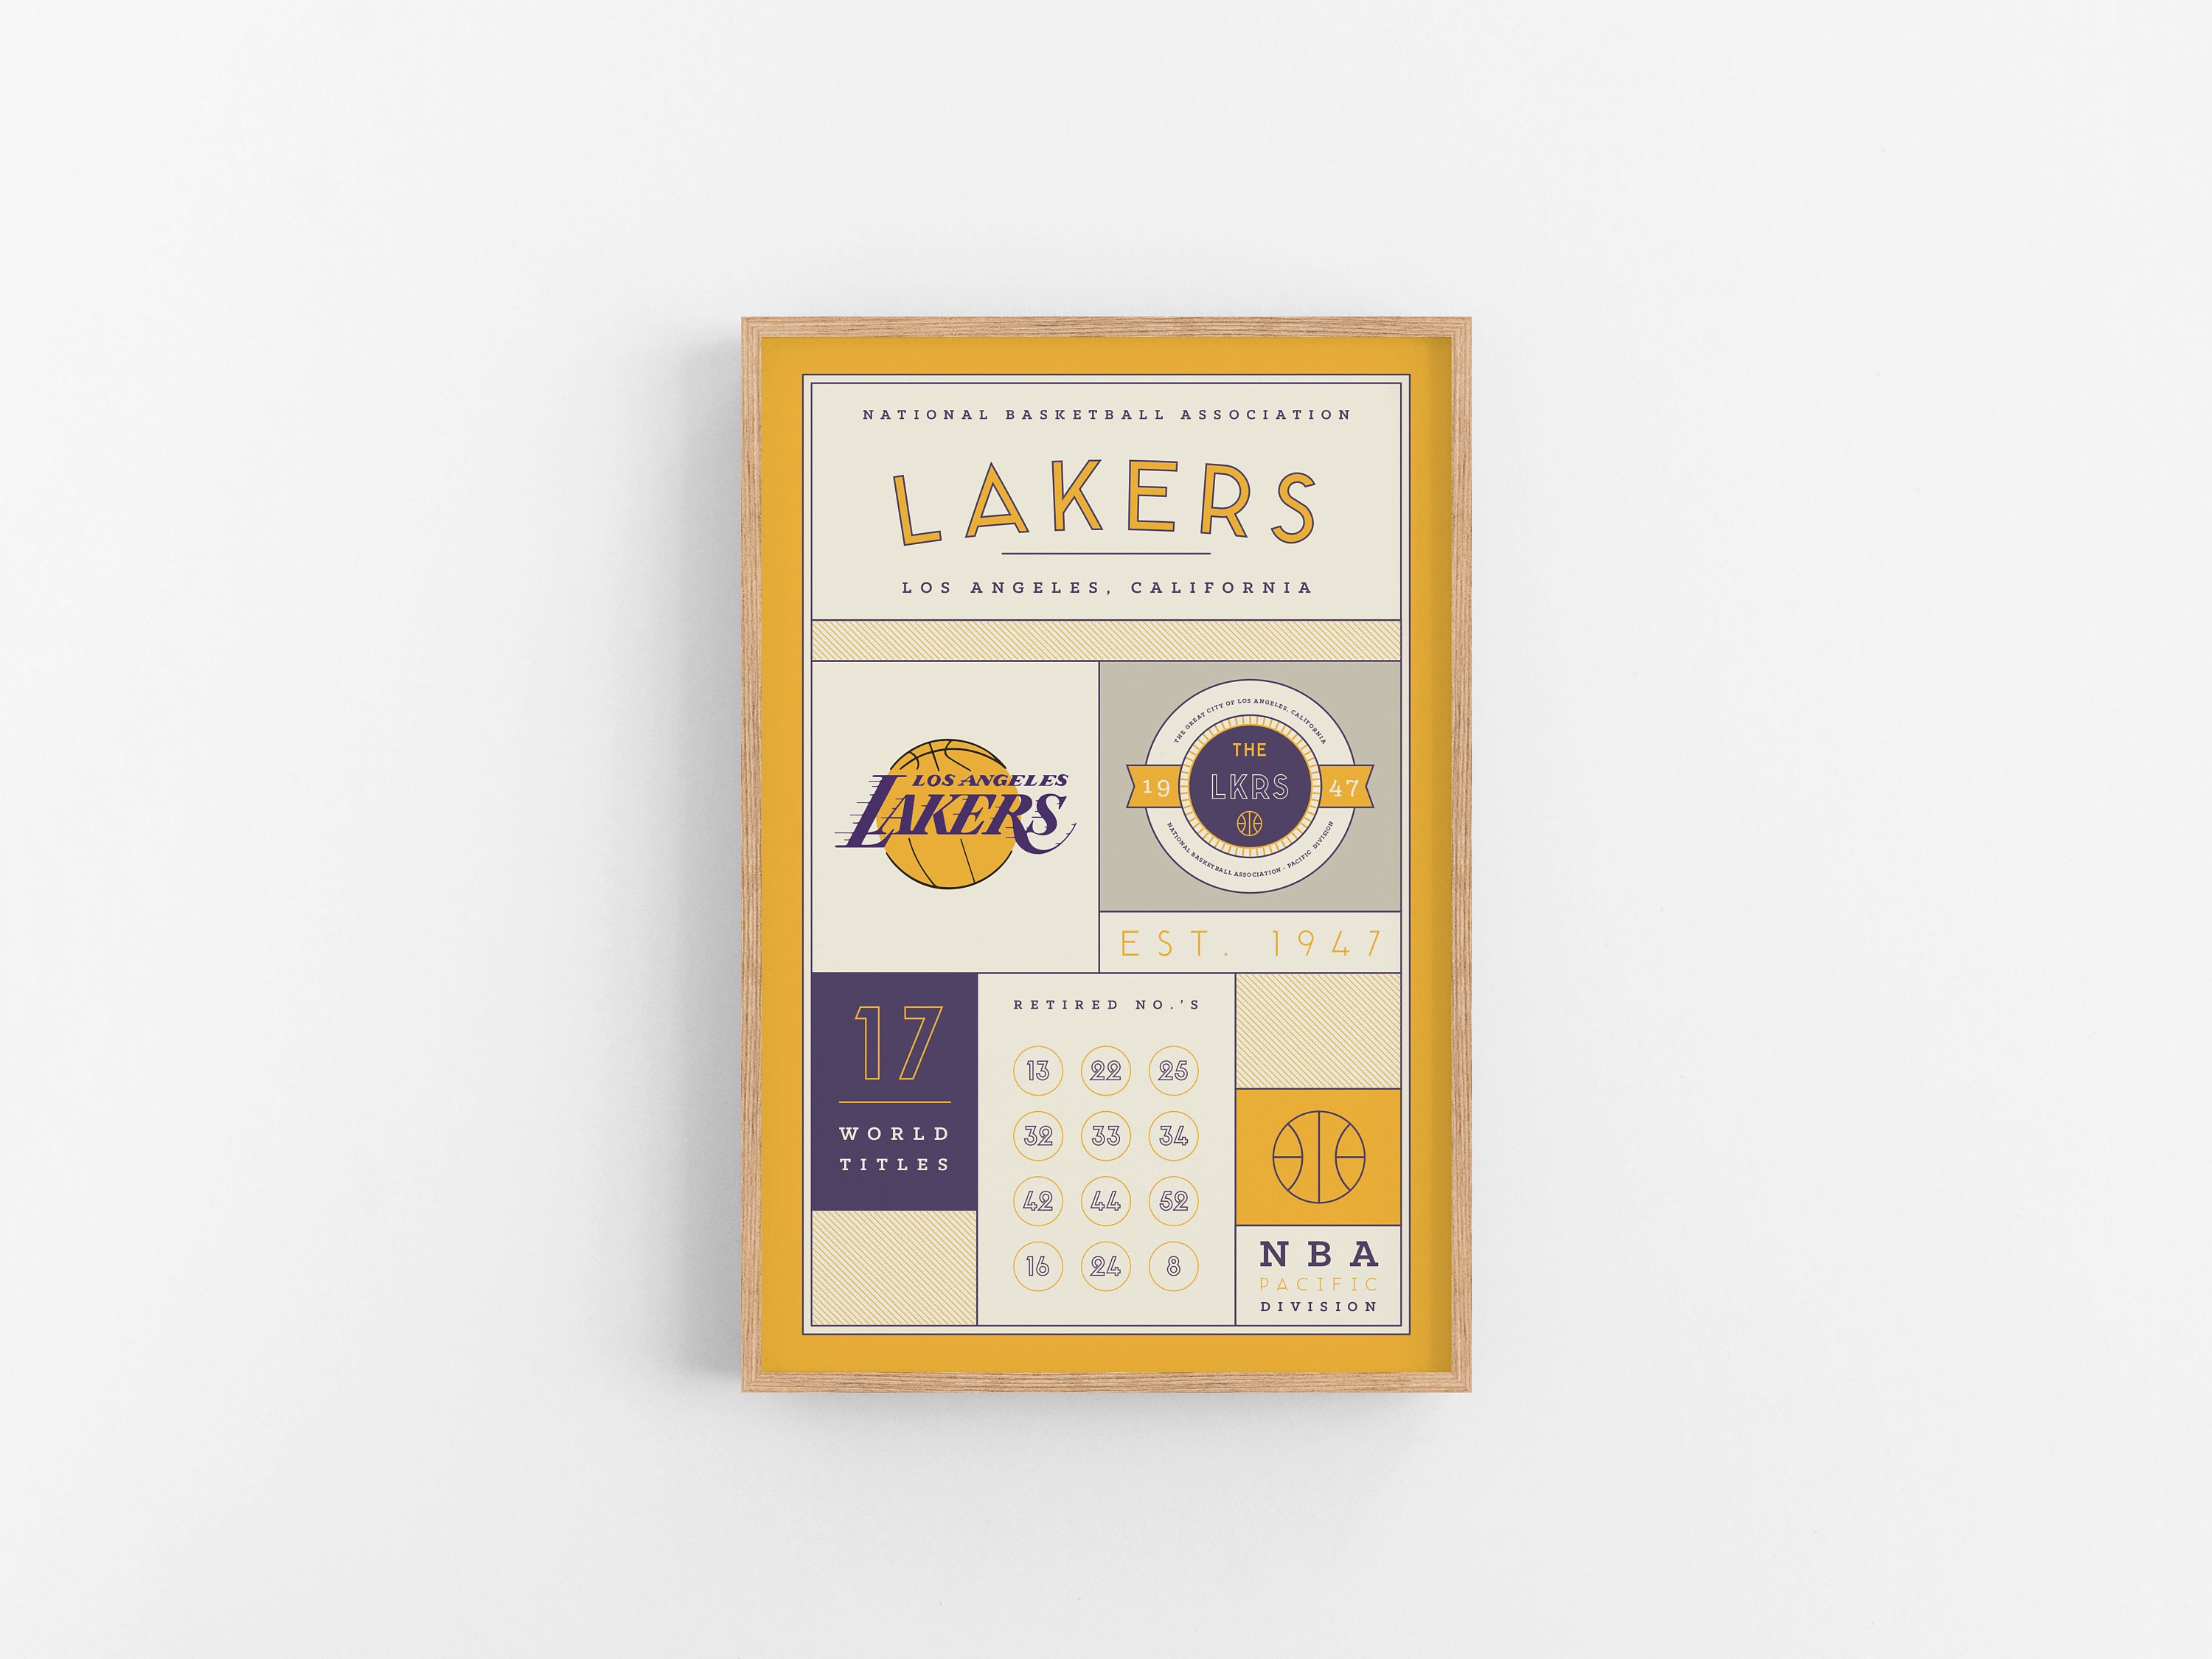 Los Angeles Lakers Basketball Vintage Sports Schedules for sale